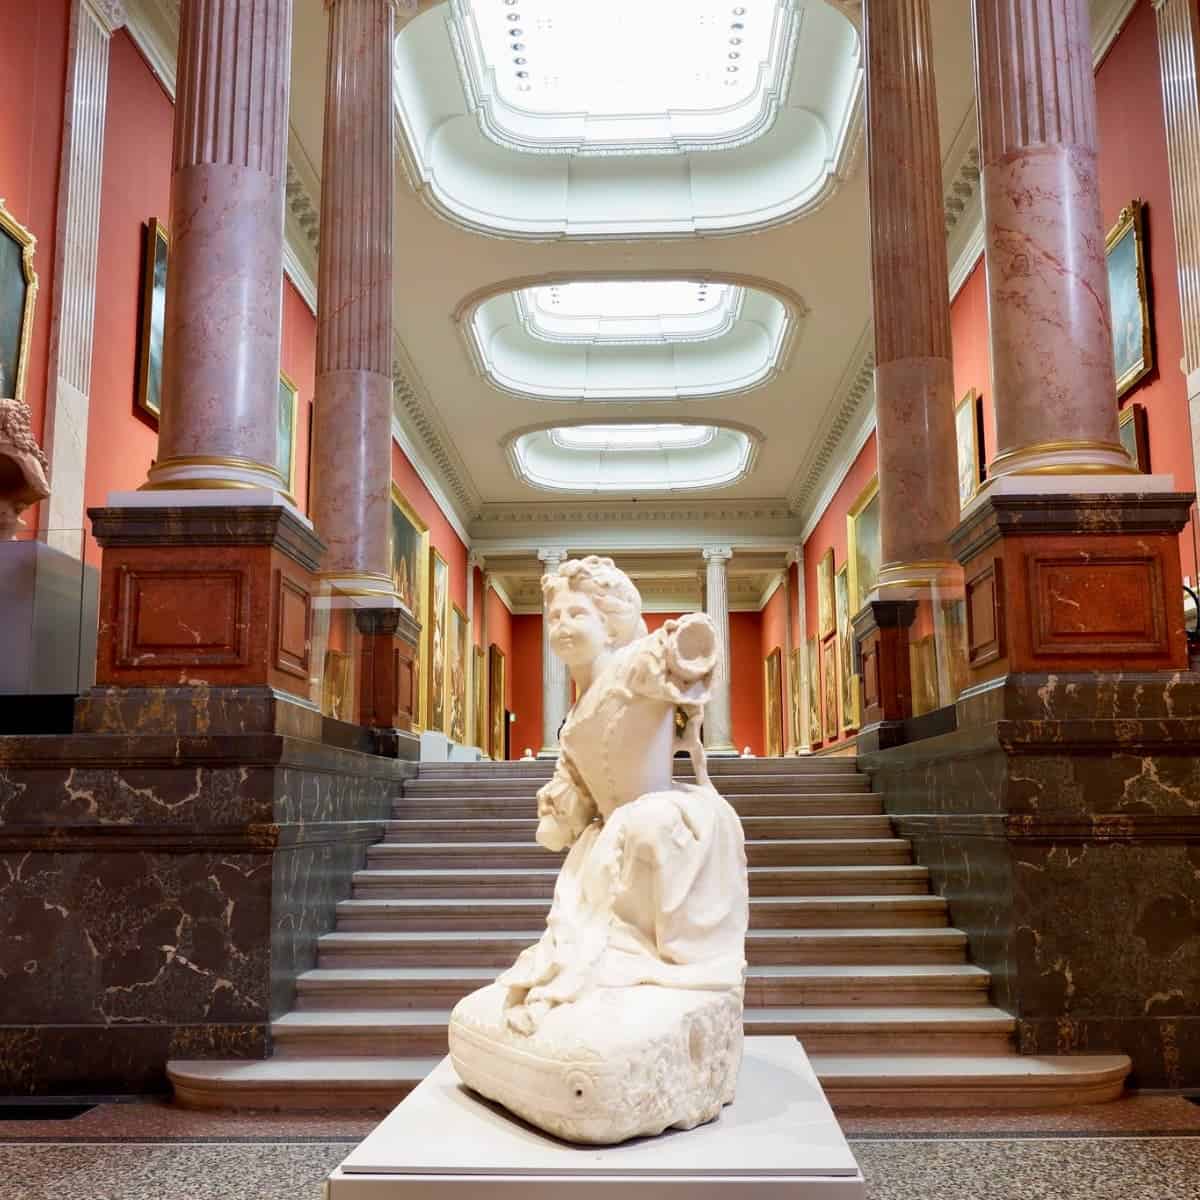 A white statue in the interior of Musee Fabre.